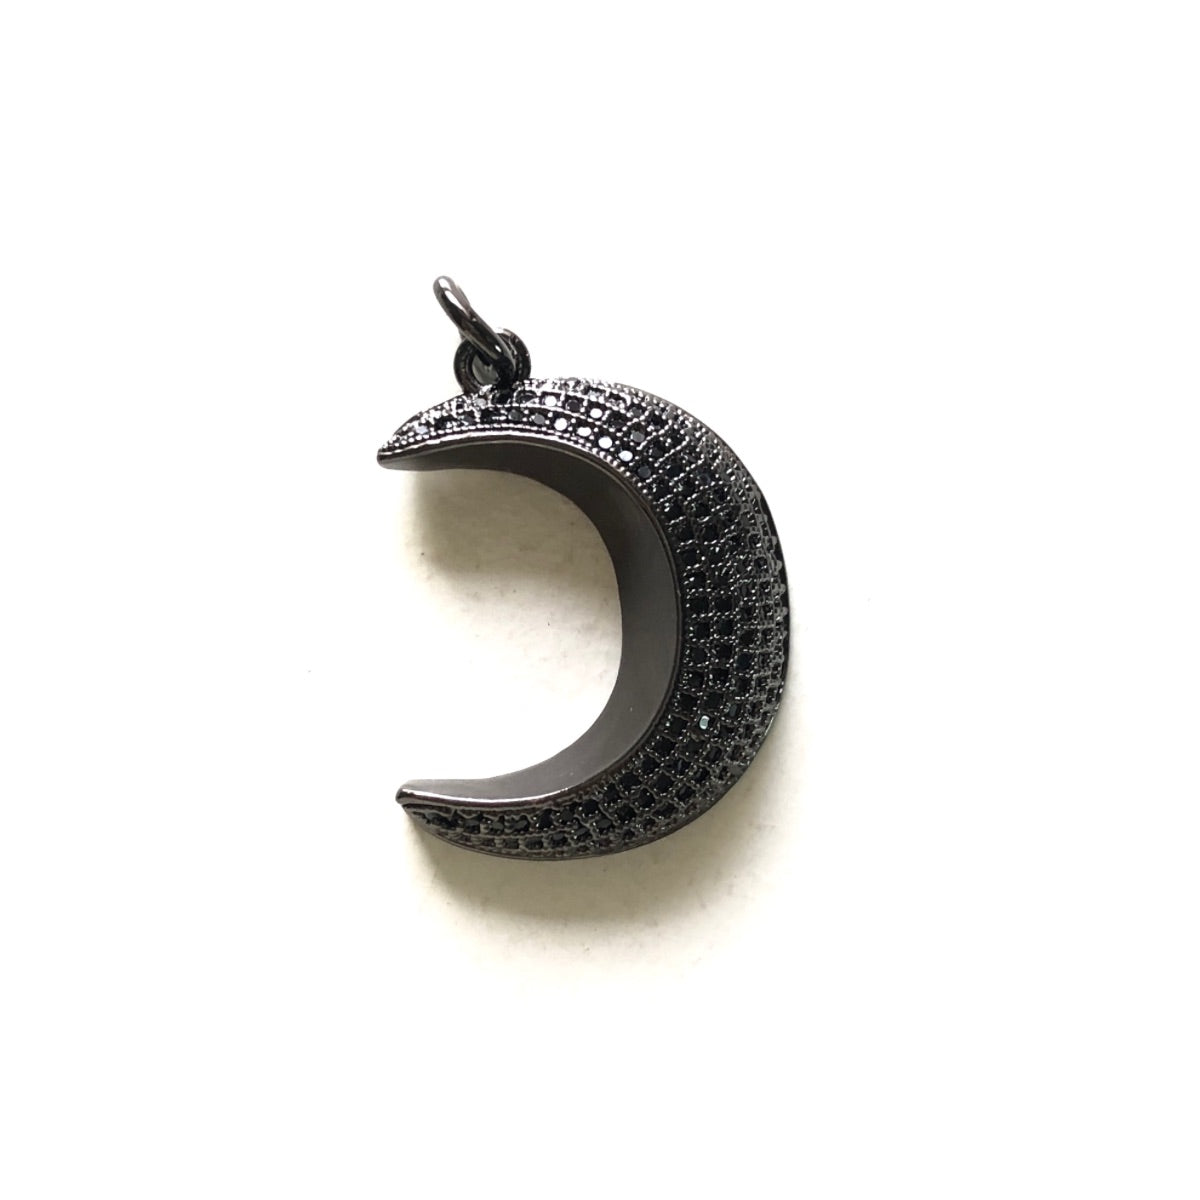 10pcs/lot 28*20.5mm CZ Paved New Moon Crescent Charms Black on Black CZ Paved Charms Sun Moon Stars Charms Beads Beyond